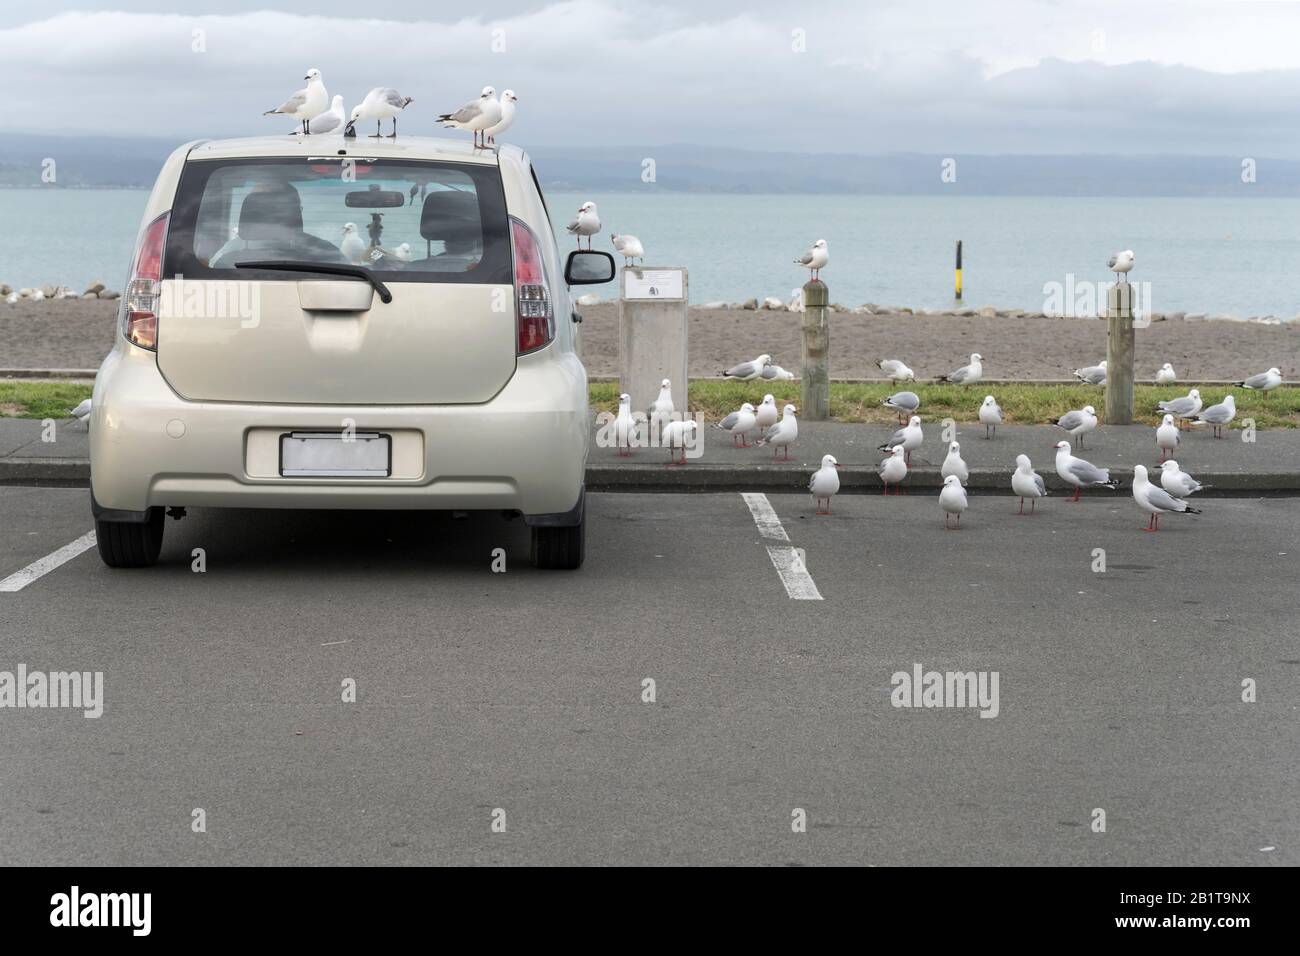 flock of seagulls pressurizing people in car for food they are eating, shot in bright spring cloudy light  at Ahuriri, Napier, Hawke Bay, North Island Stock Photo